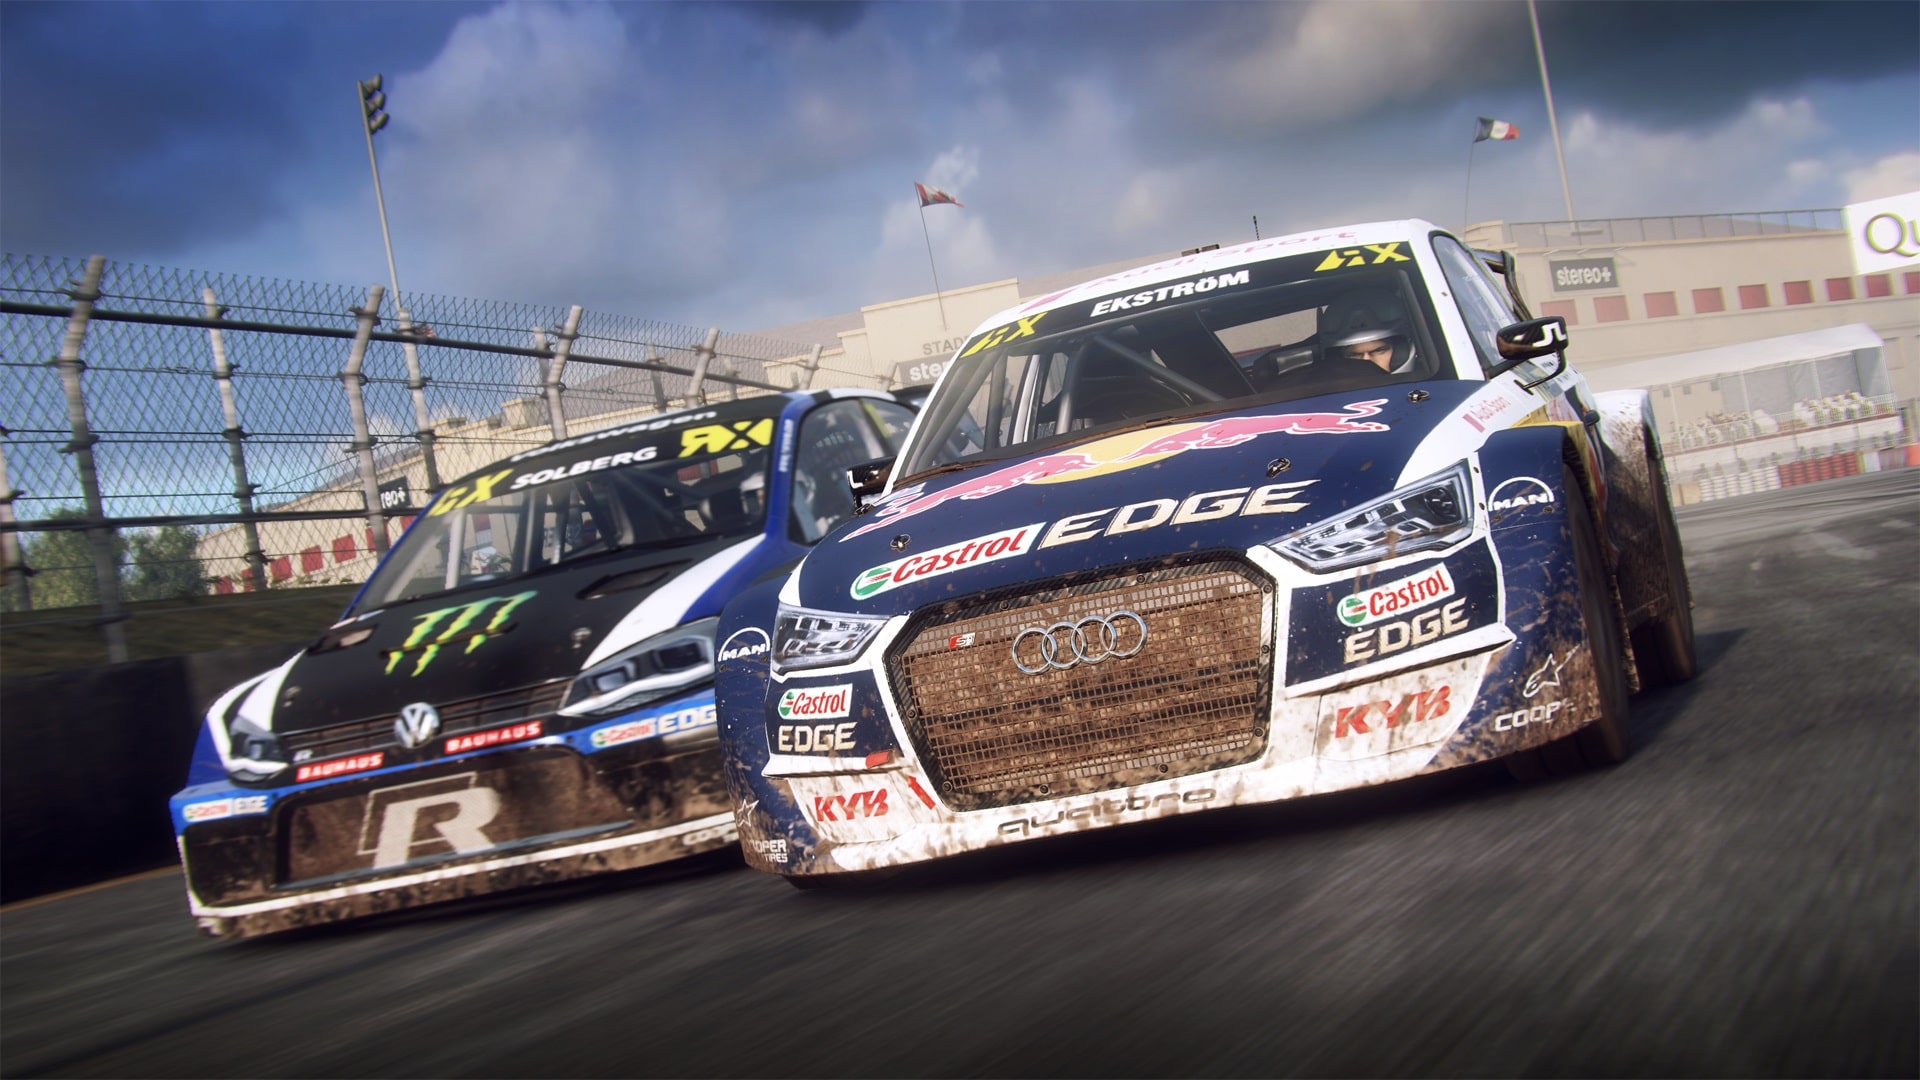 DiRT Rally 2.0 PlayStation - League of Europe